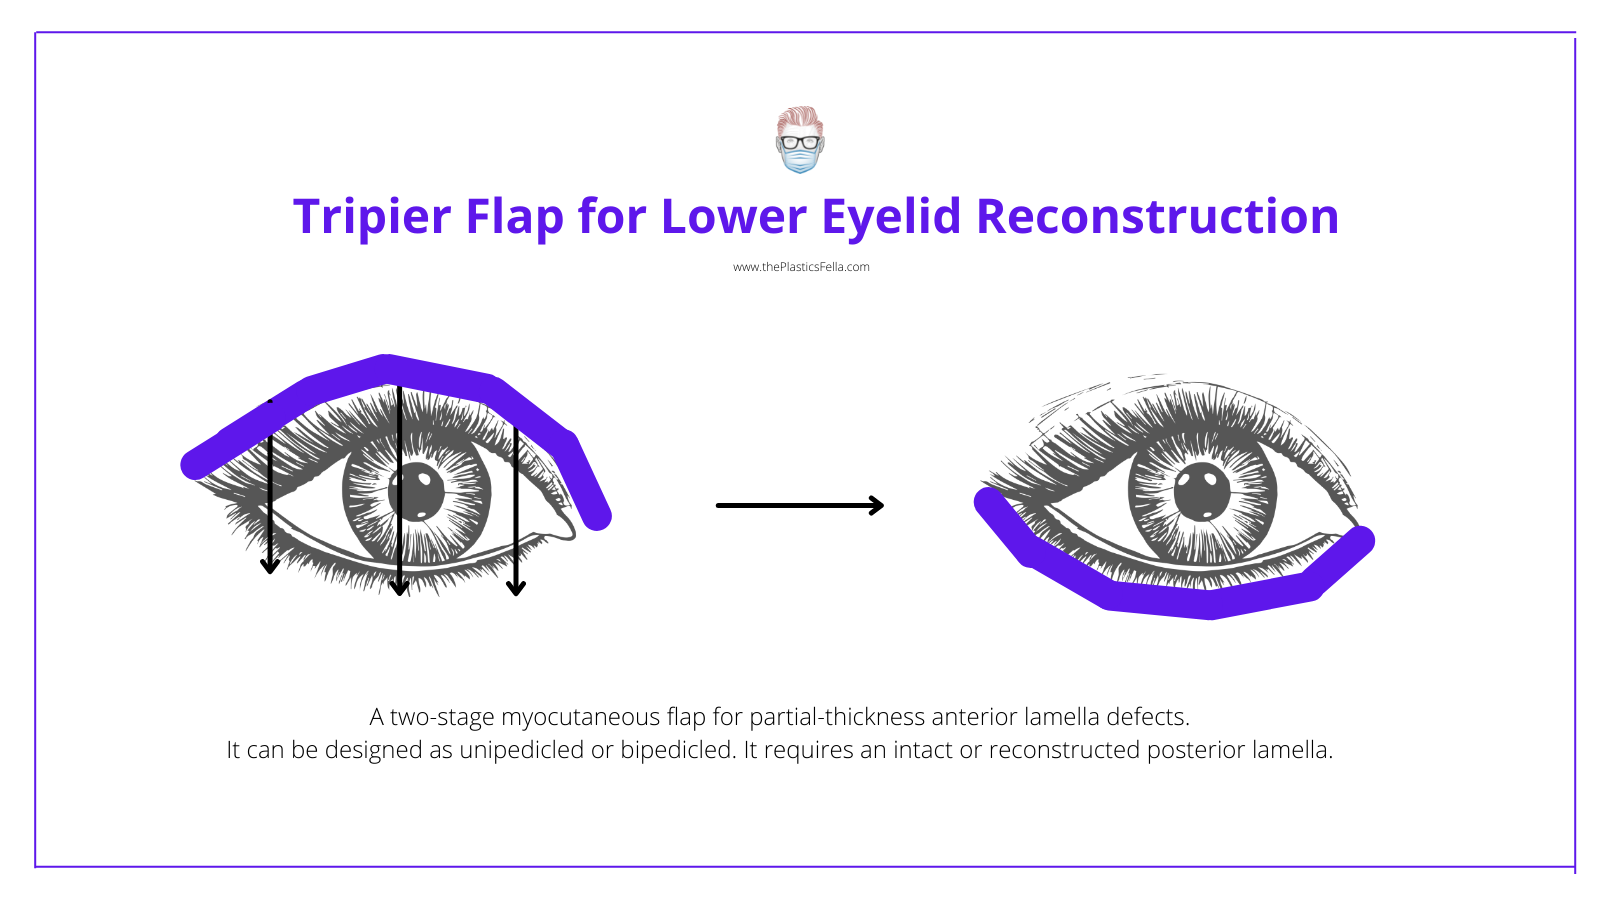 Tripier Flap for Lower Eyelid Reconstruction, Tripier Flap, Lower Eyelid Reconstruction